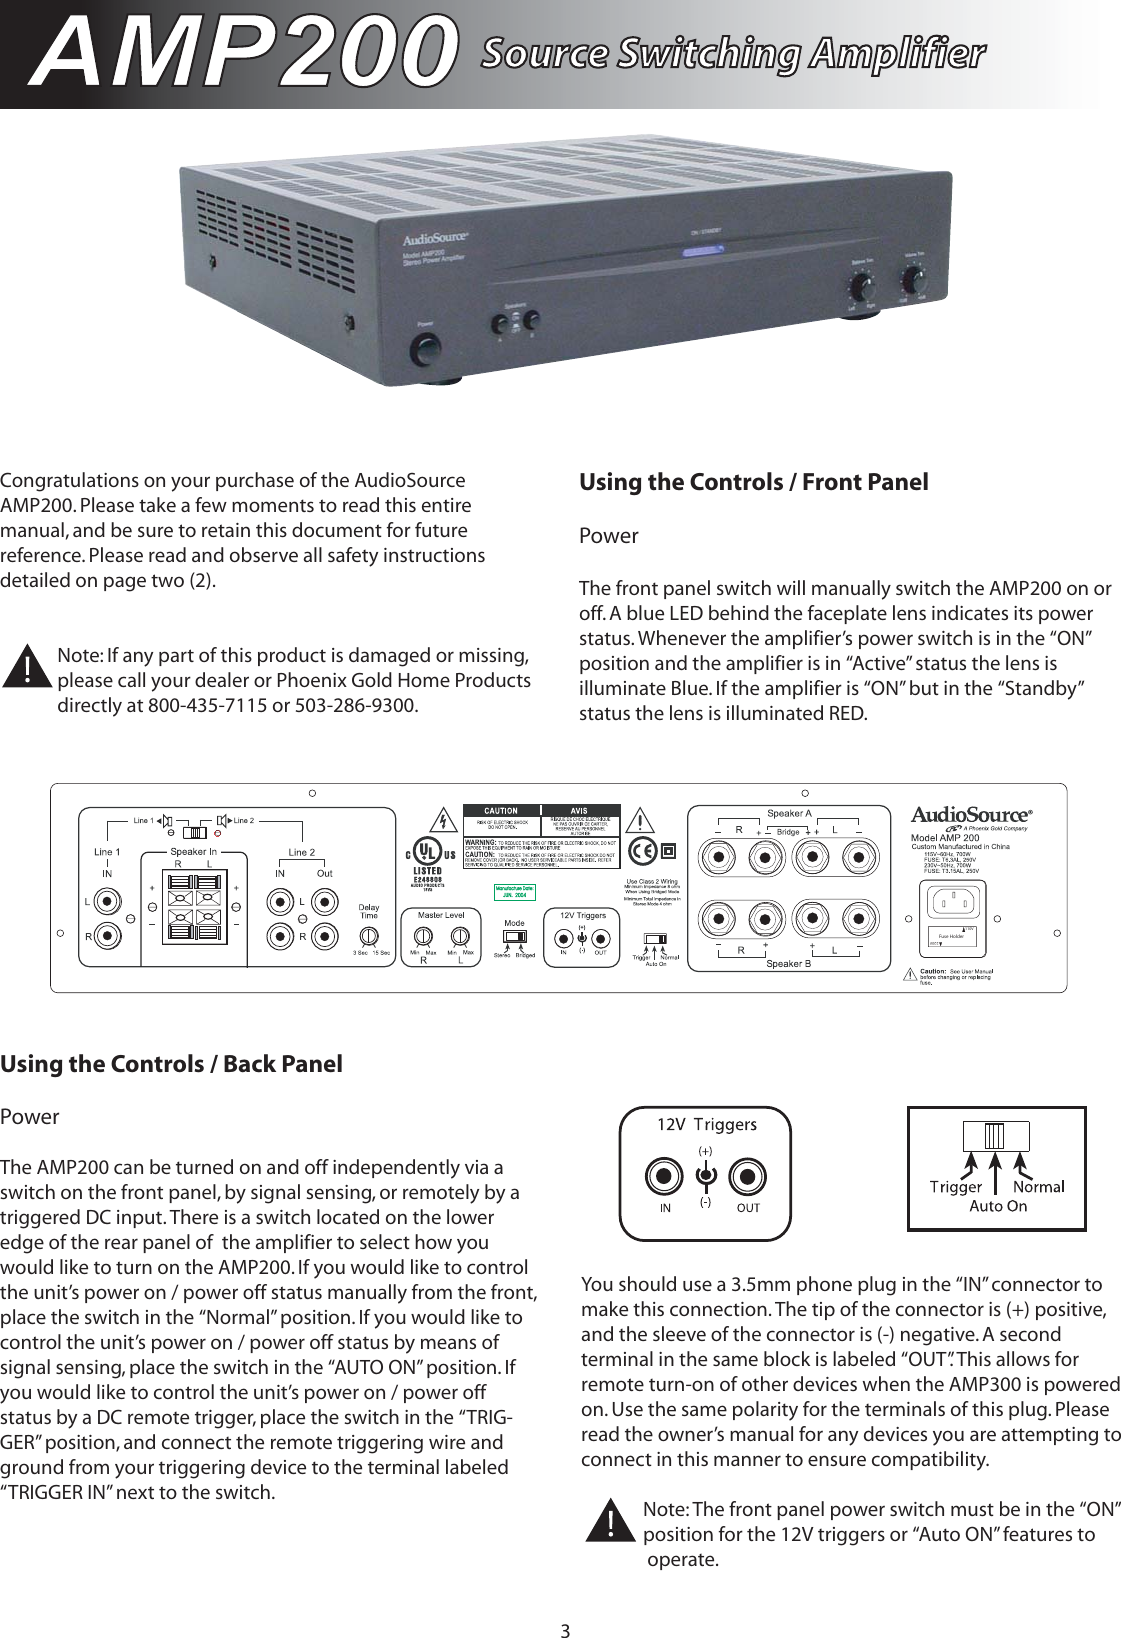 Page 3 of 6 - Audiosource Audiosource-Audiosource-Stereo-Amplifier-Amp200-Users-Manual- Page-1  Audiosource-audiosource-stereo-amplifier-amp200-users-manual